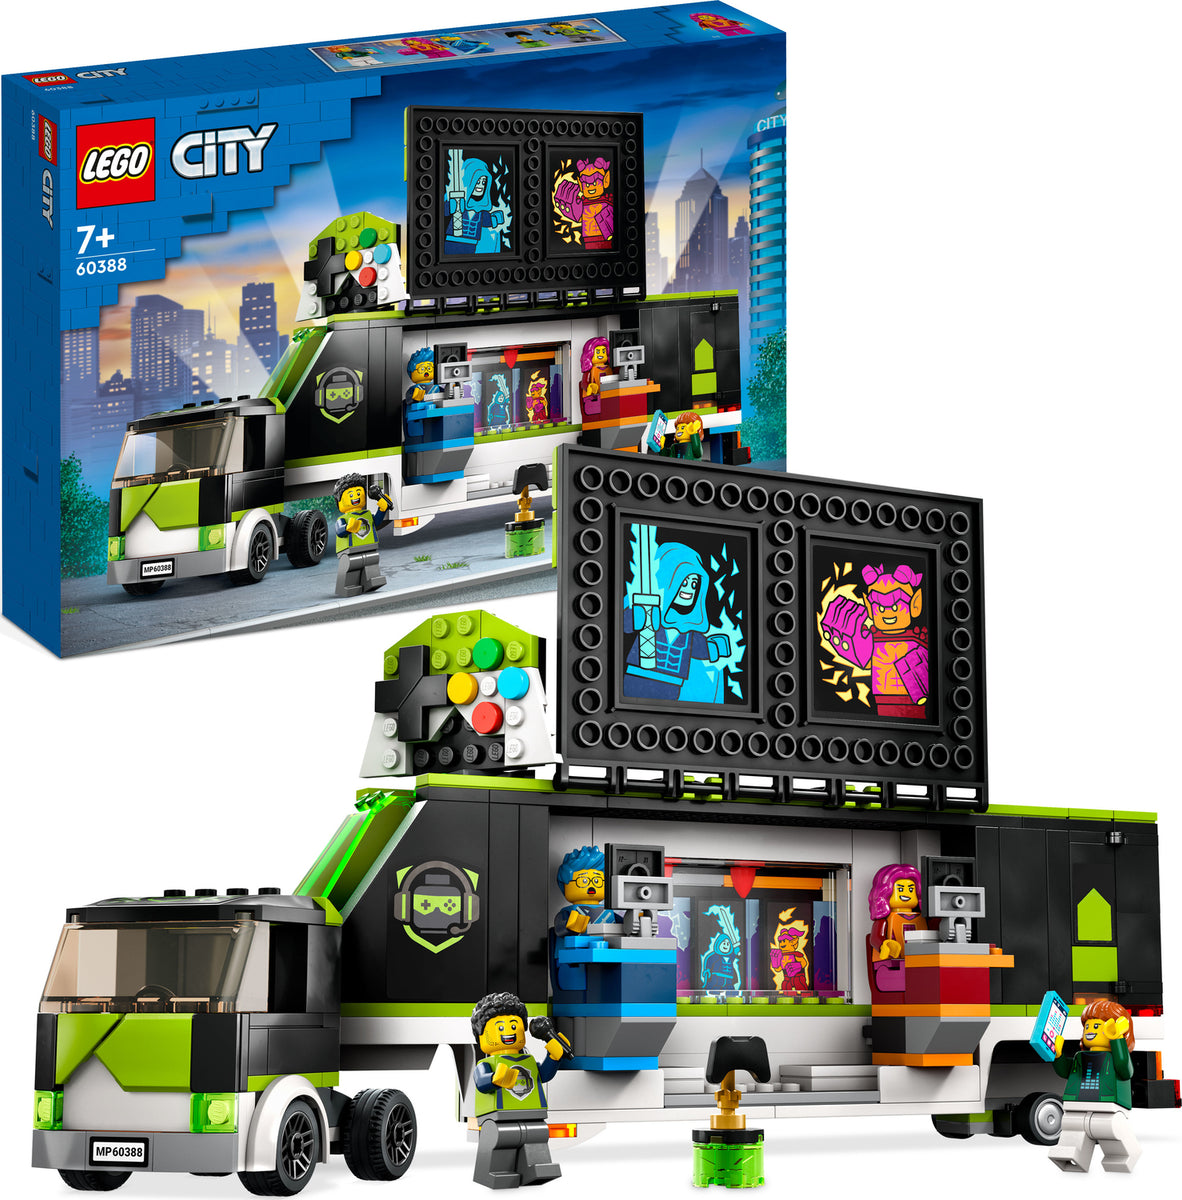 City 60388 Toys LEGO Gaming Tournament – Turner Truck